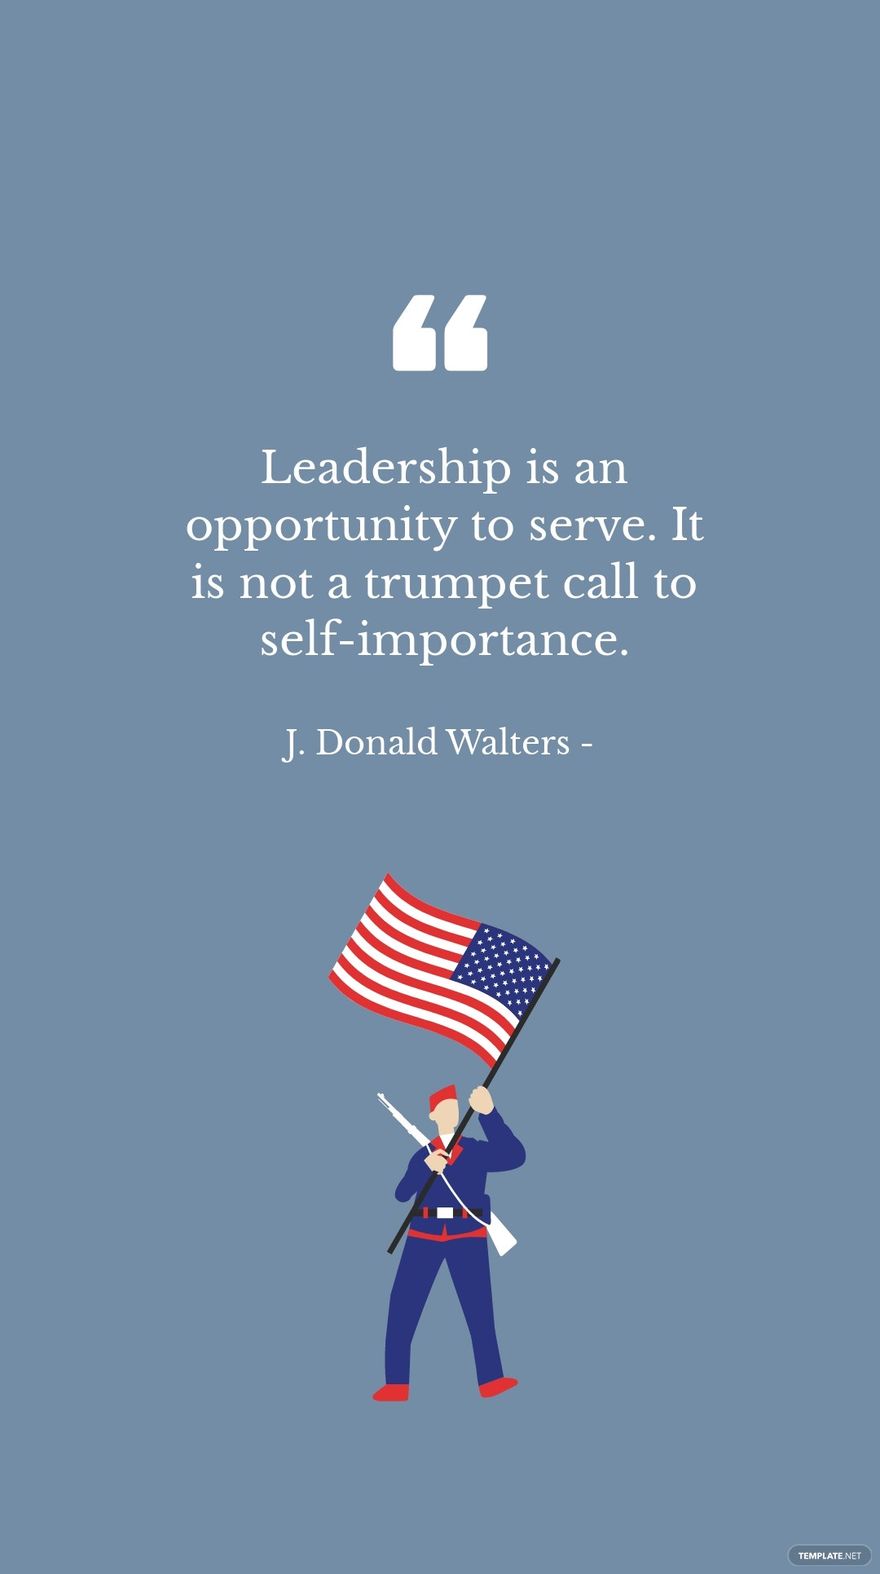 J. Donald Walters - Leadership is an opportunity to serve. It is not a trumpet call to self-importance.